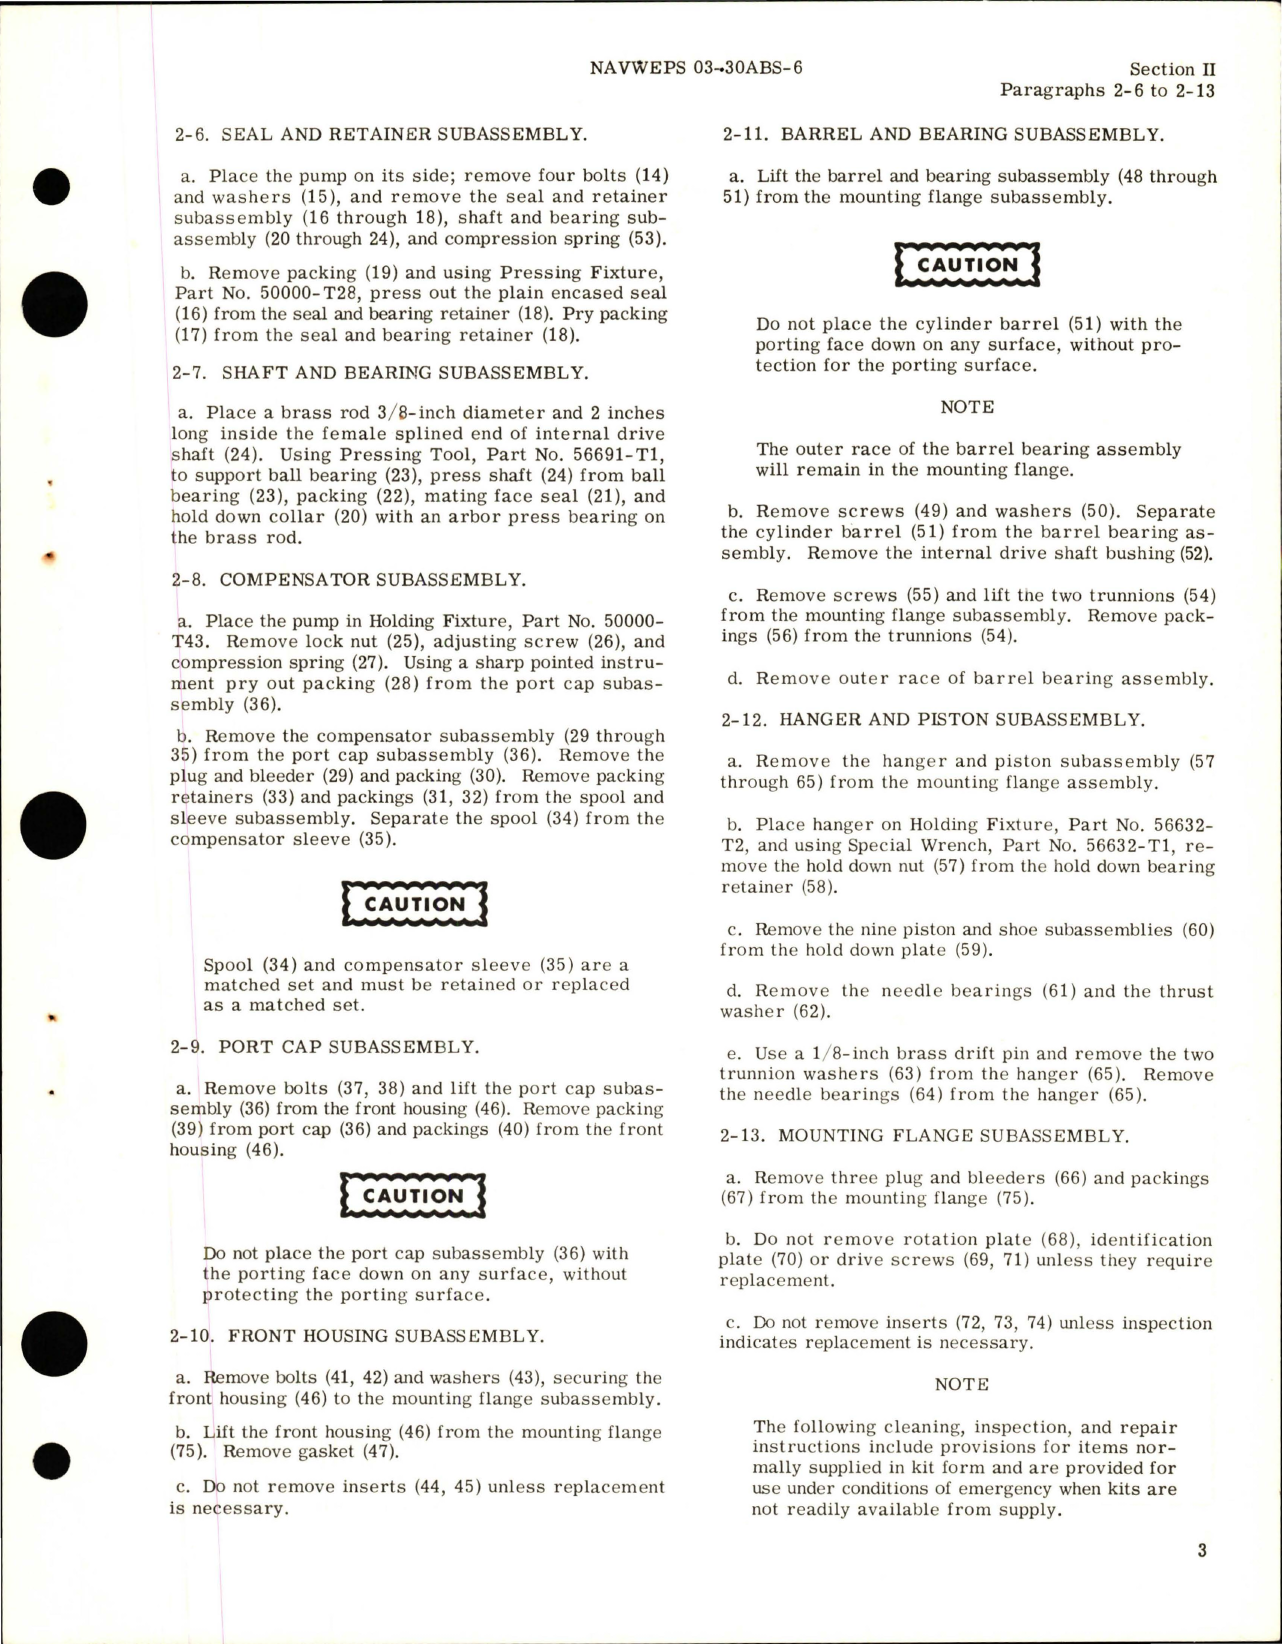 Sample page 7 from AirCorps Library document: Overhaul Instructions for Variable Displacement Hydraulic Pump - Model AP6VSC-2 - Part 51015